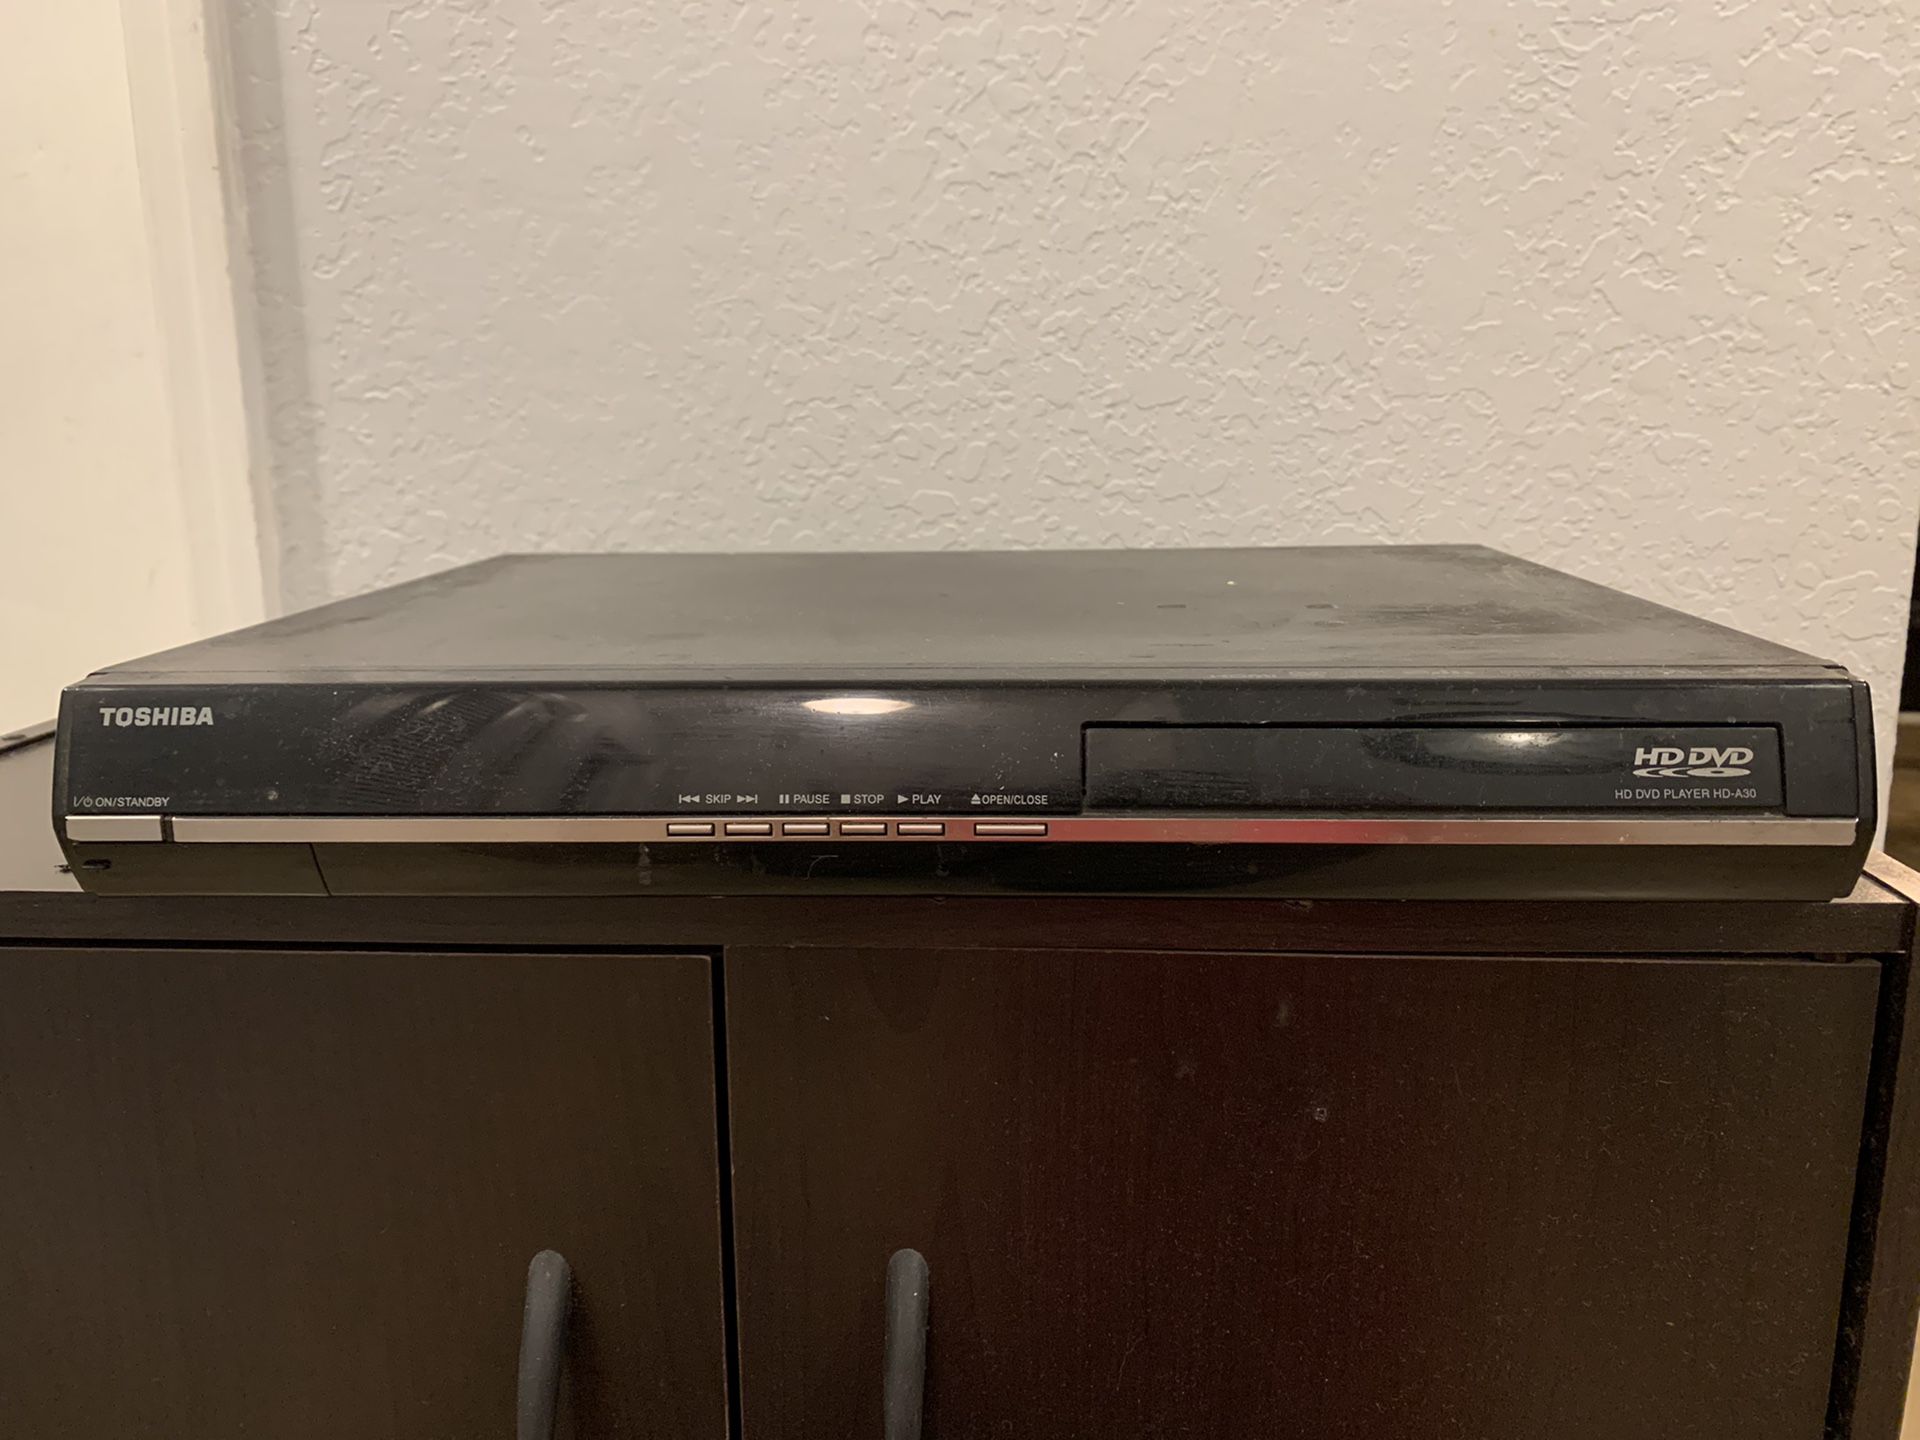 HD DVD PLAYER WITH 29 MOVIES - make me an offer MUST SELL ASAP